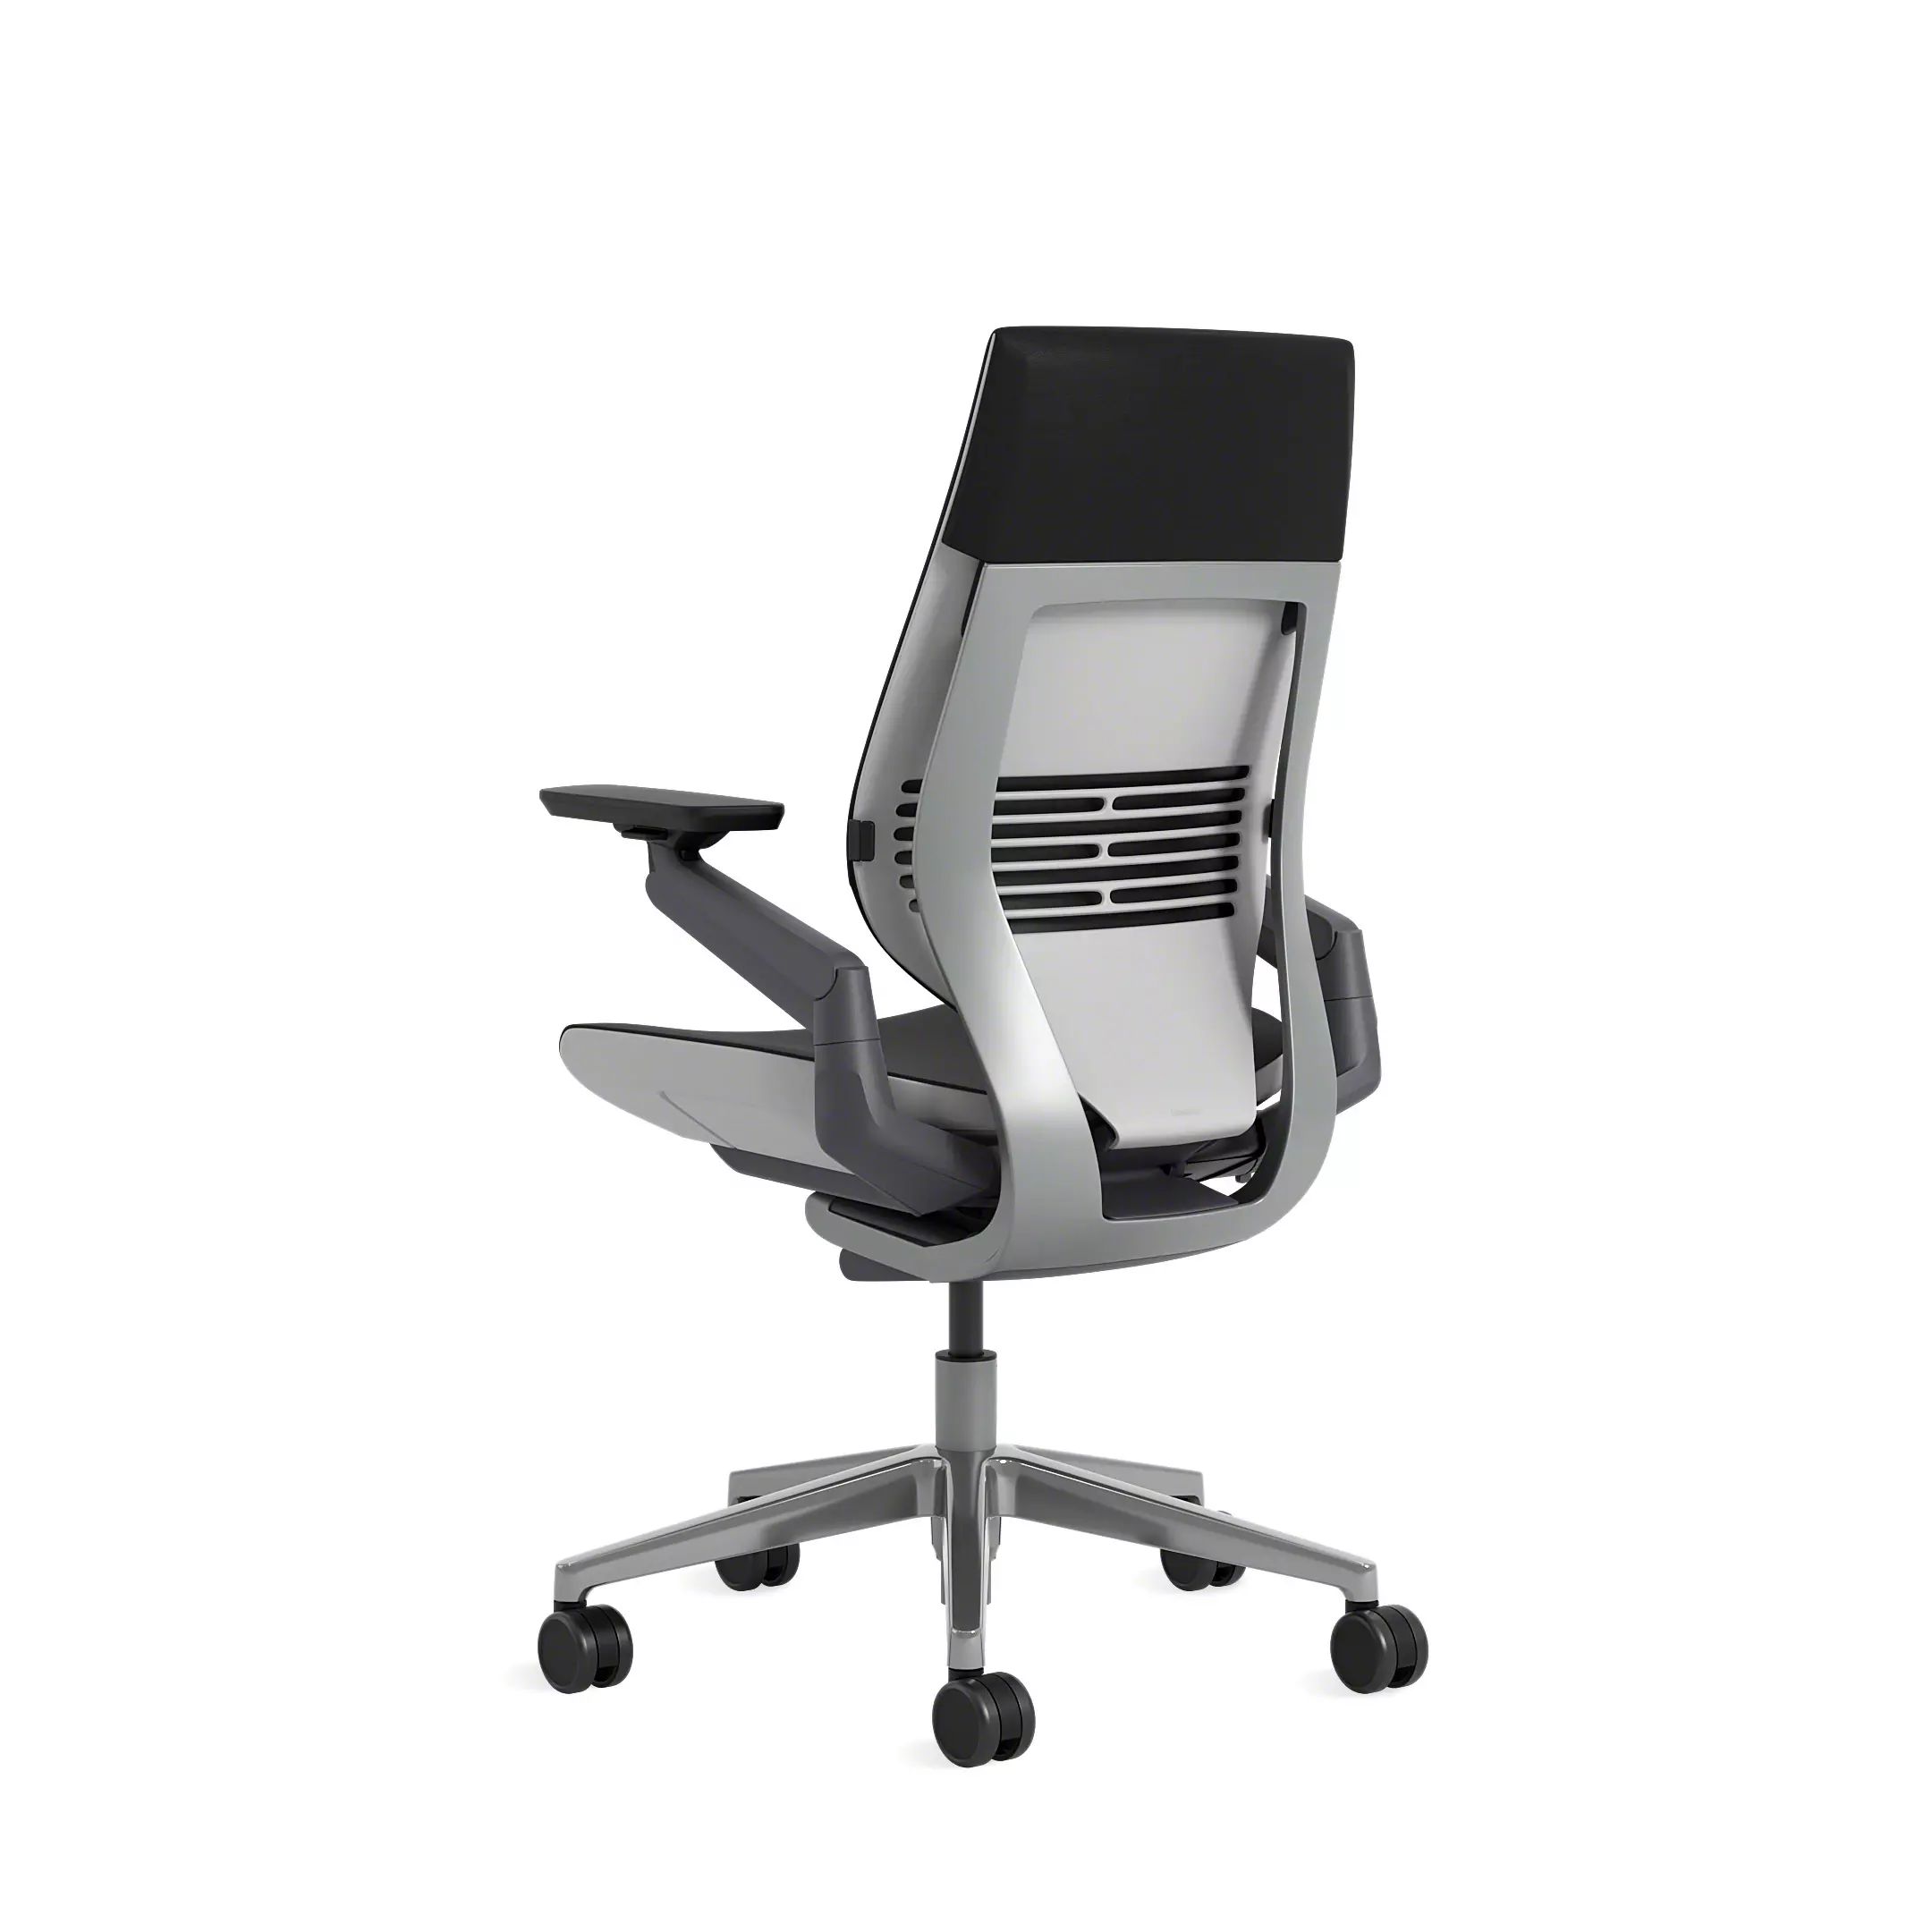 mesh texture, gray lining of office chair, background Stock Photo